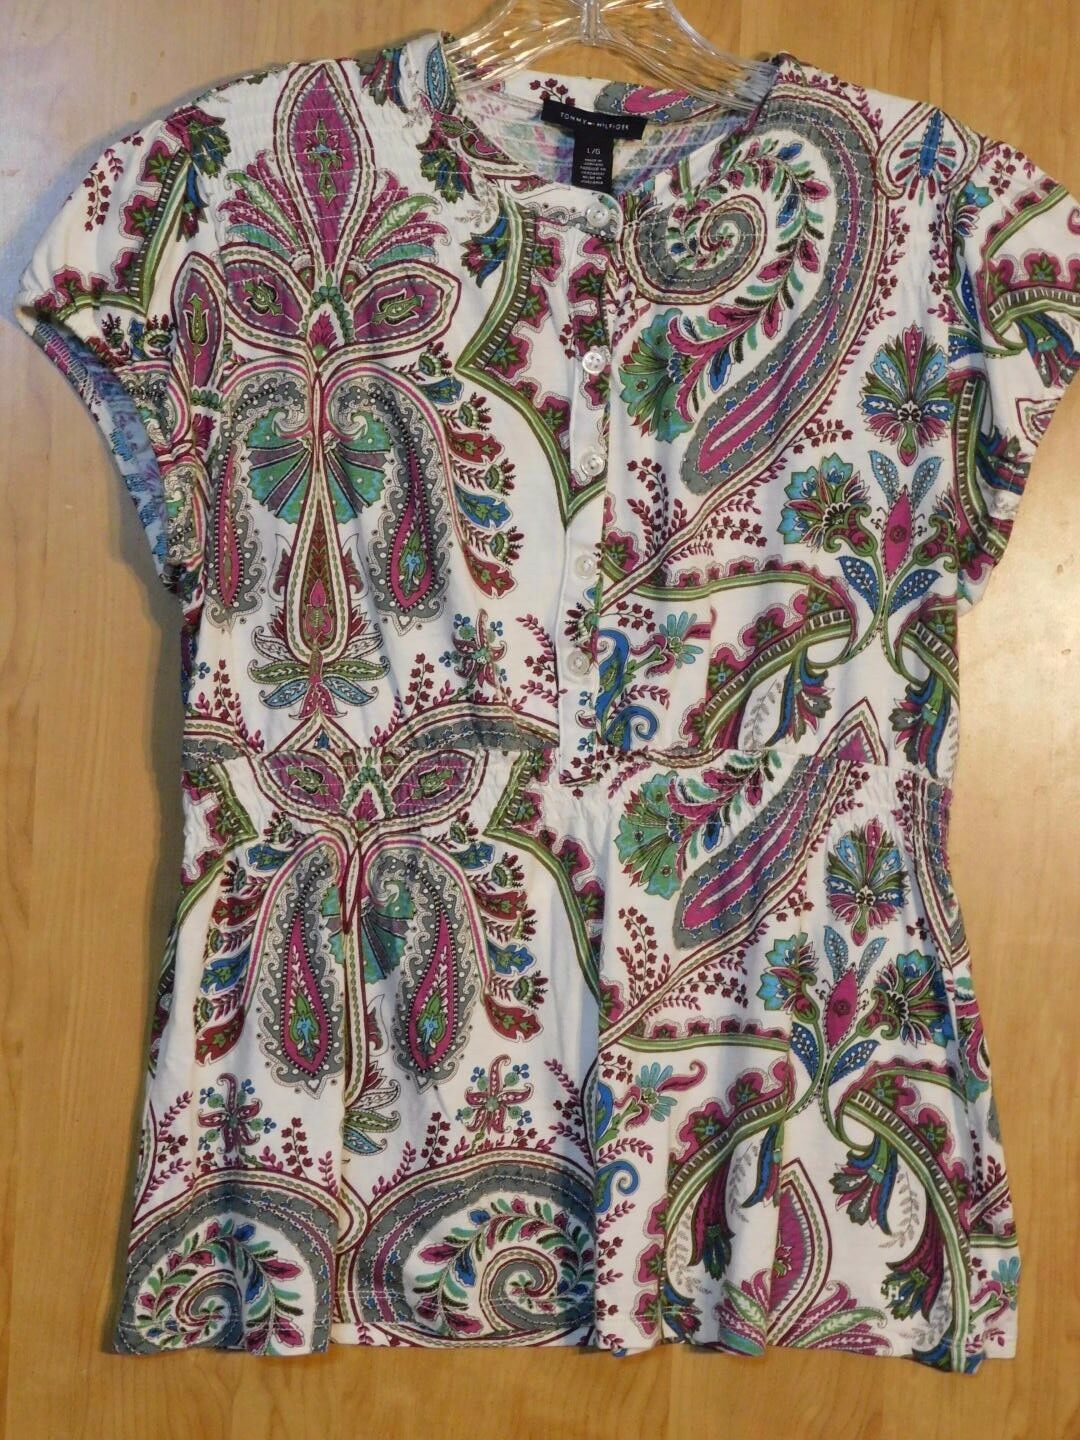 Primary image for WOMEN'S PAISLEY BLOUSE BY TOMMY HILFIGER / SIZE L